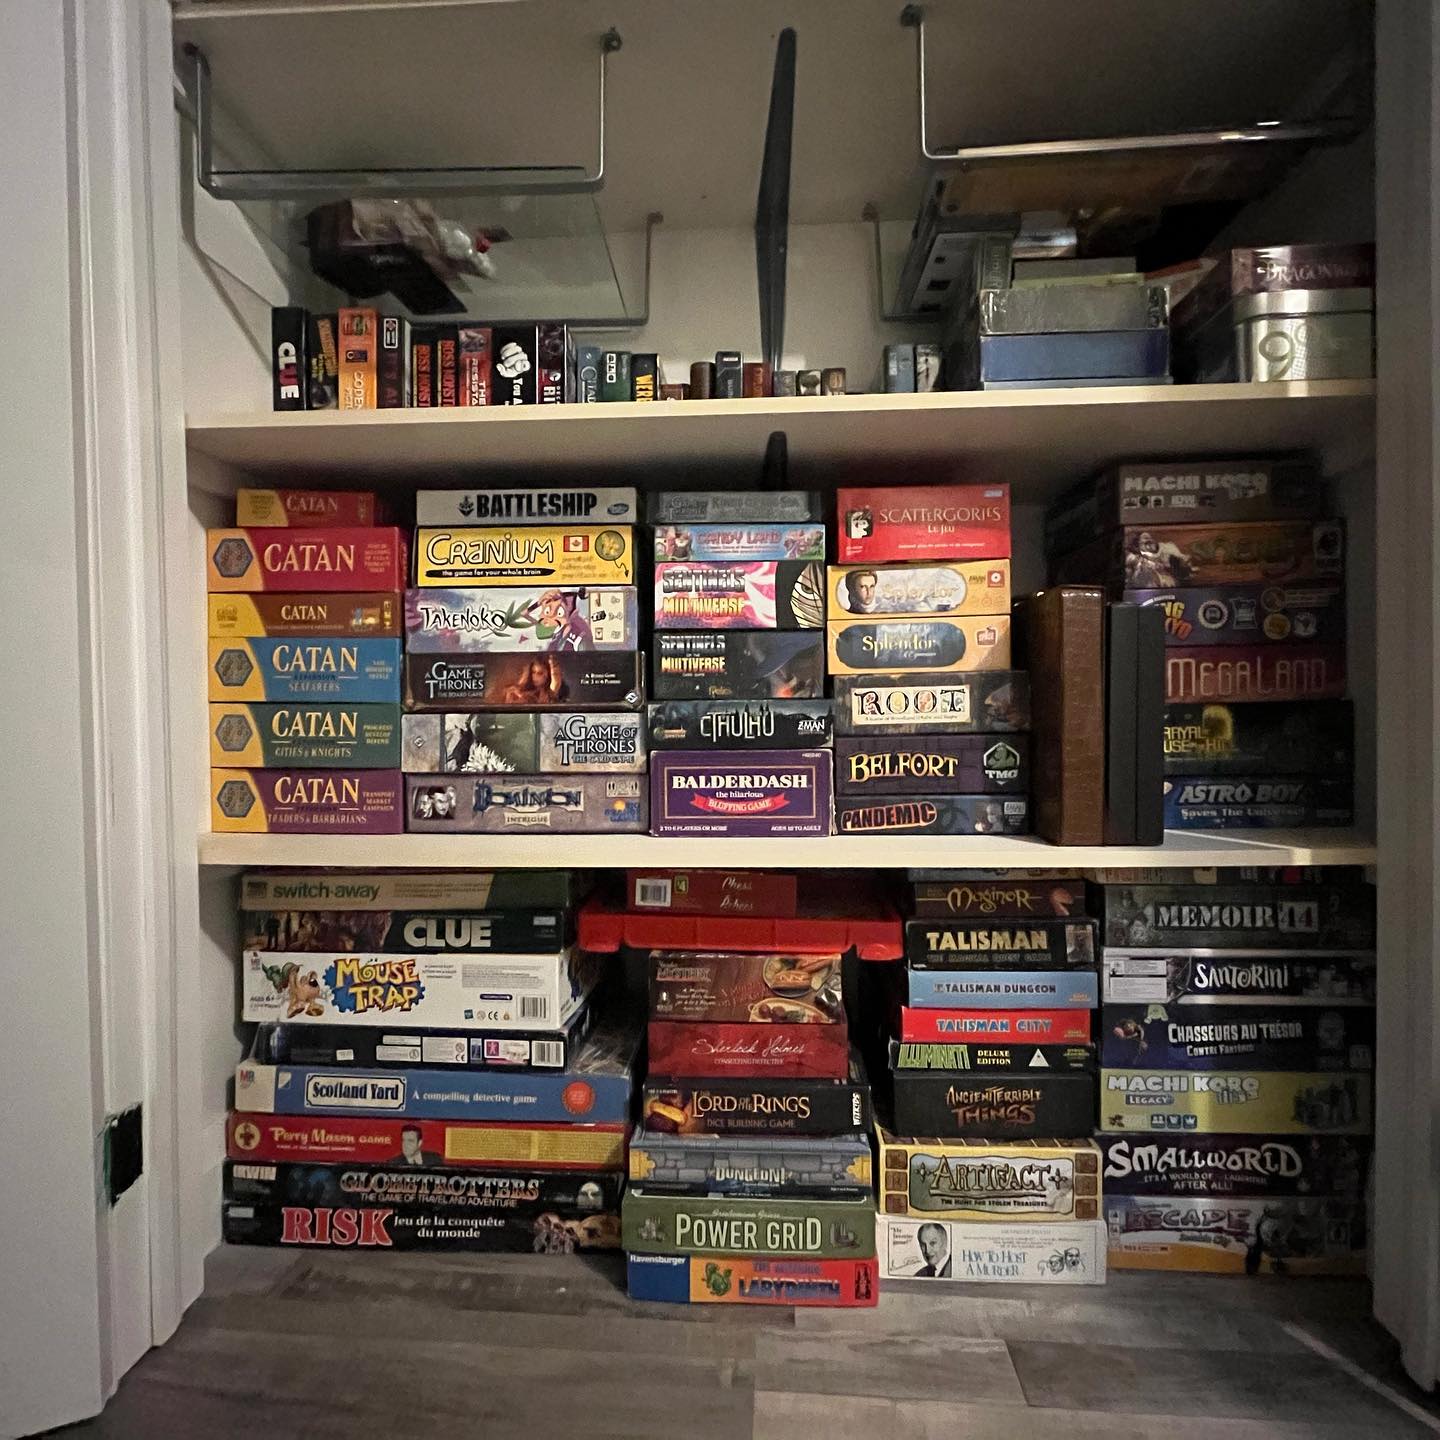 Renovation Update: The board game closet has been restored